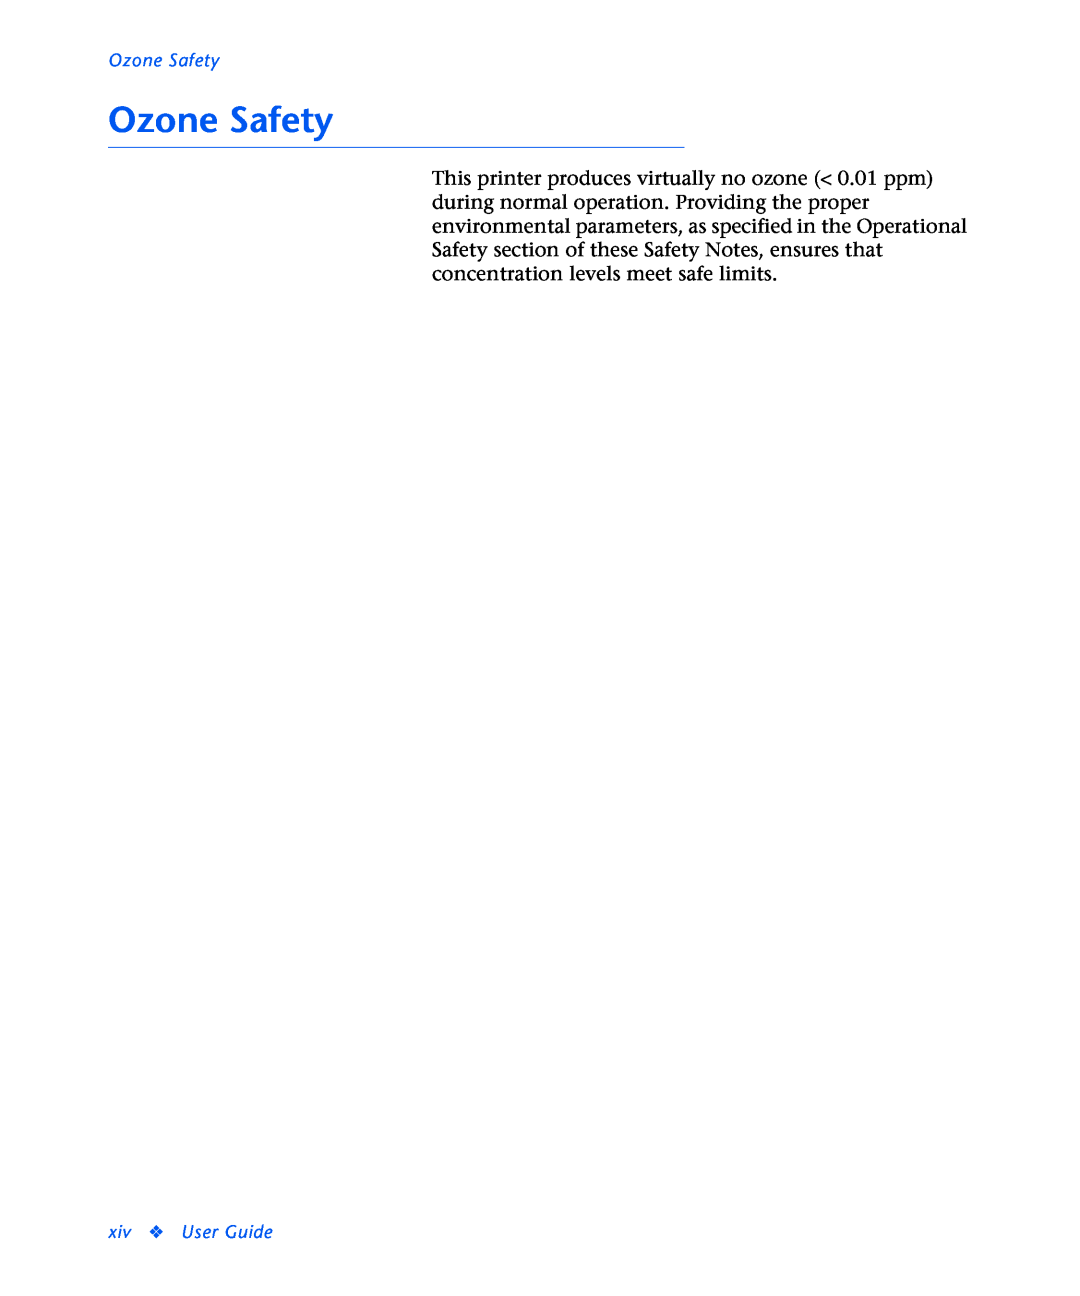 Xerox N2125 manual Ozone Safety, xiv User Guide 